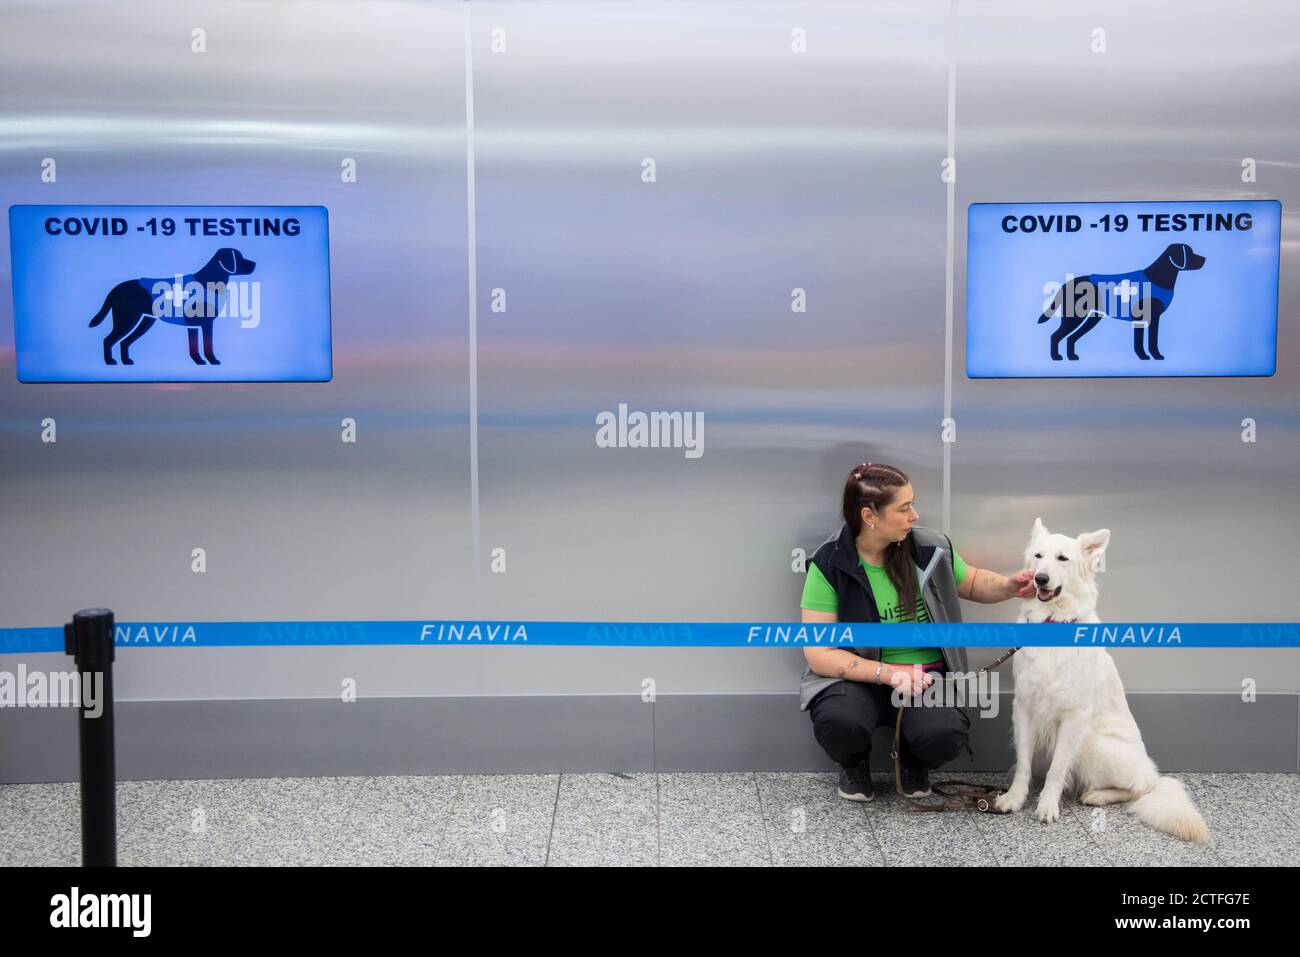 Helsinki. 22nd Sep, 2020. Photo taken on Sept. 22, 2020 shows a COVID-19 sniffer dog at a press conference held at Helsinki Vantaa International Airport in Finland. Four specially trained dogs demonstrated their ability to sniff COVID-19 in people even before showing symptoms during a press conference held at Helsinki Vantaa International Airport on Tuesday. The pilot project is scheduled to commence later this week. Credit: Matti Matikainen/Xinhua/Alamy Live News Stock Photo